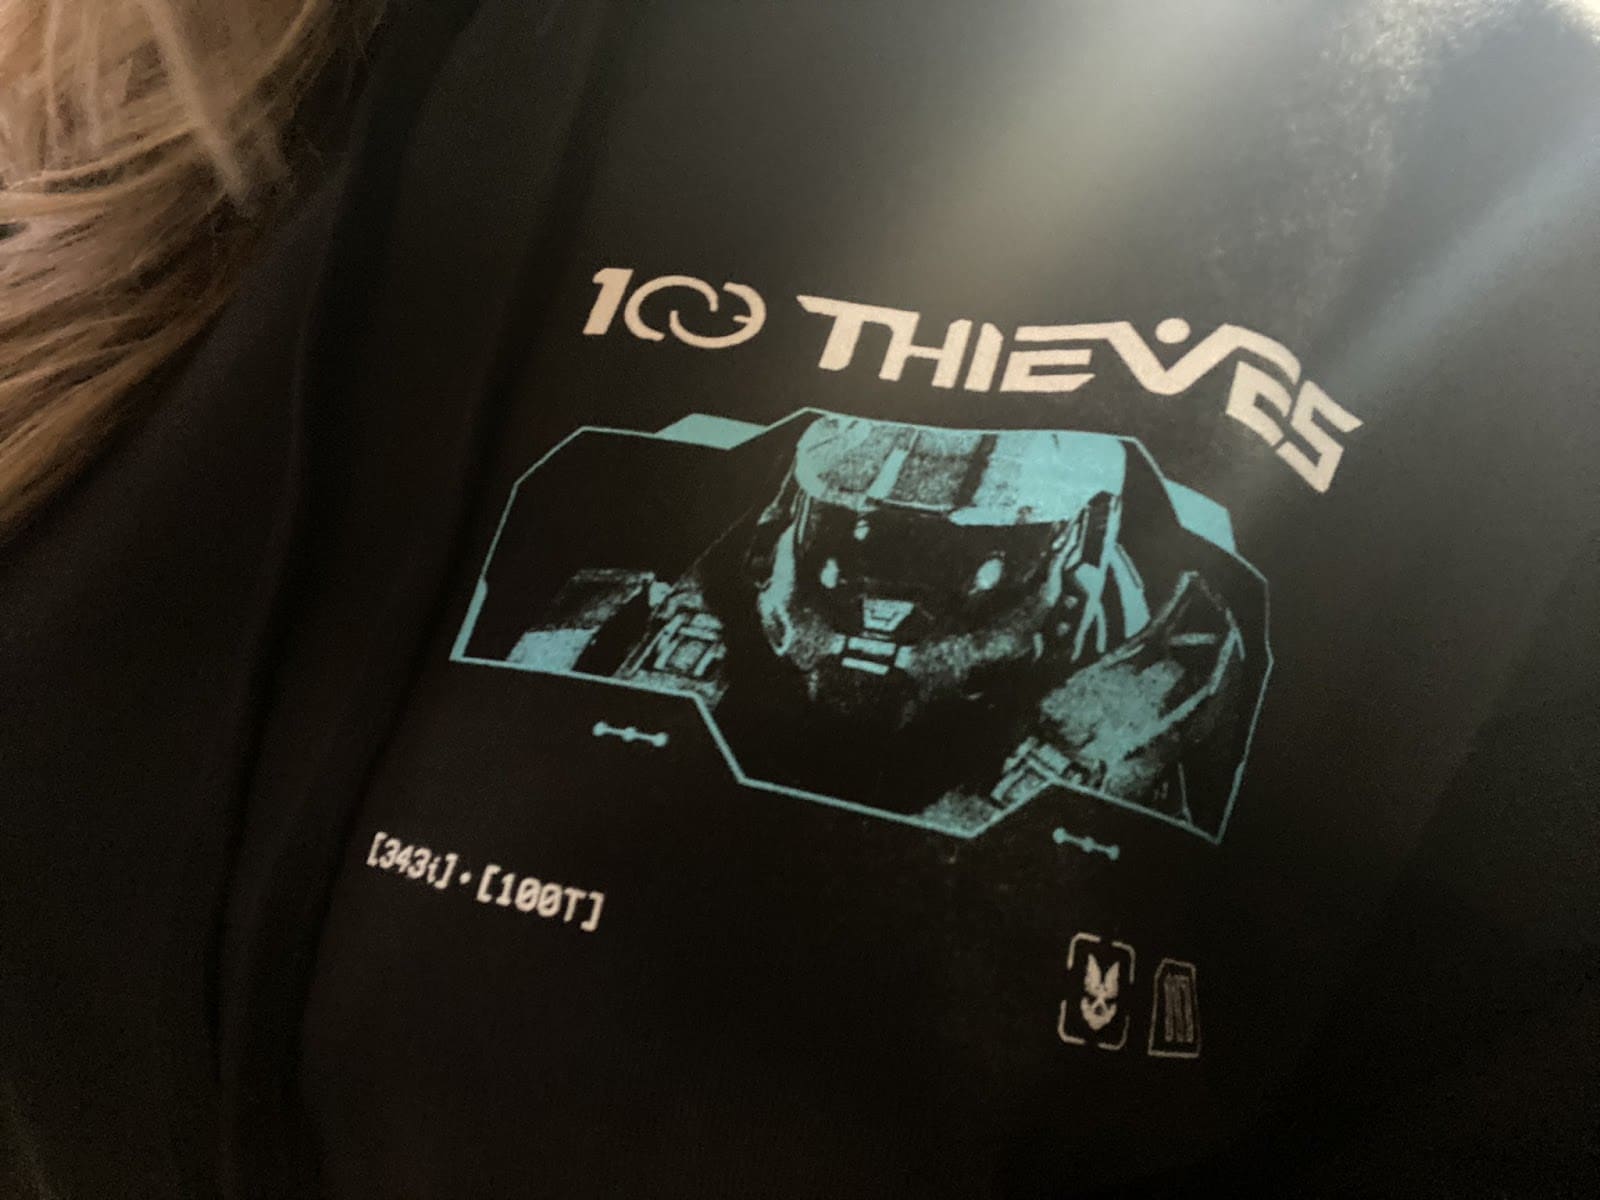 A sneak peak at the design of the new Halo x 100T apparell range, featuring the iconic Halo Master Chief helmet design and the 100 Thieves logo